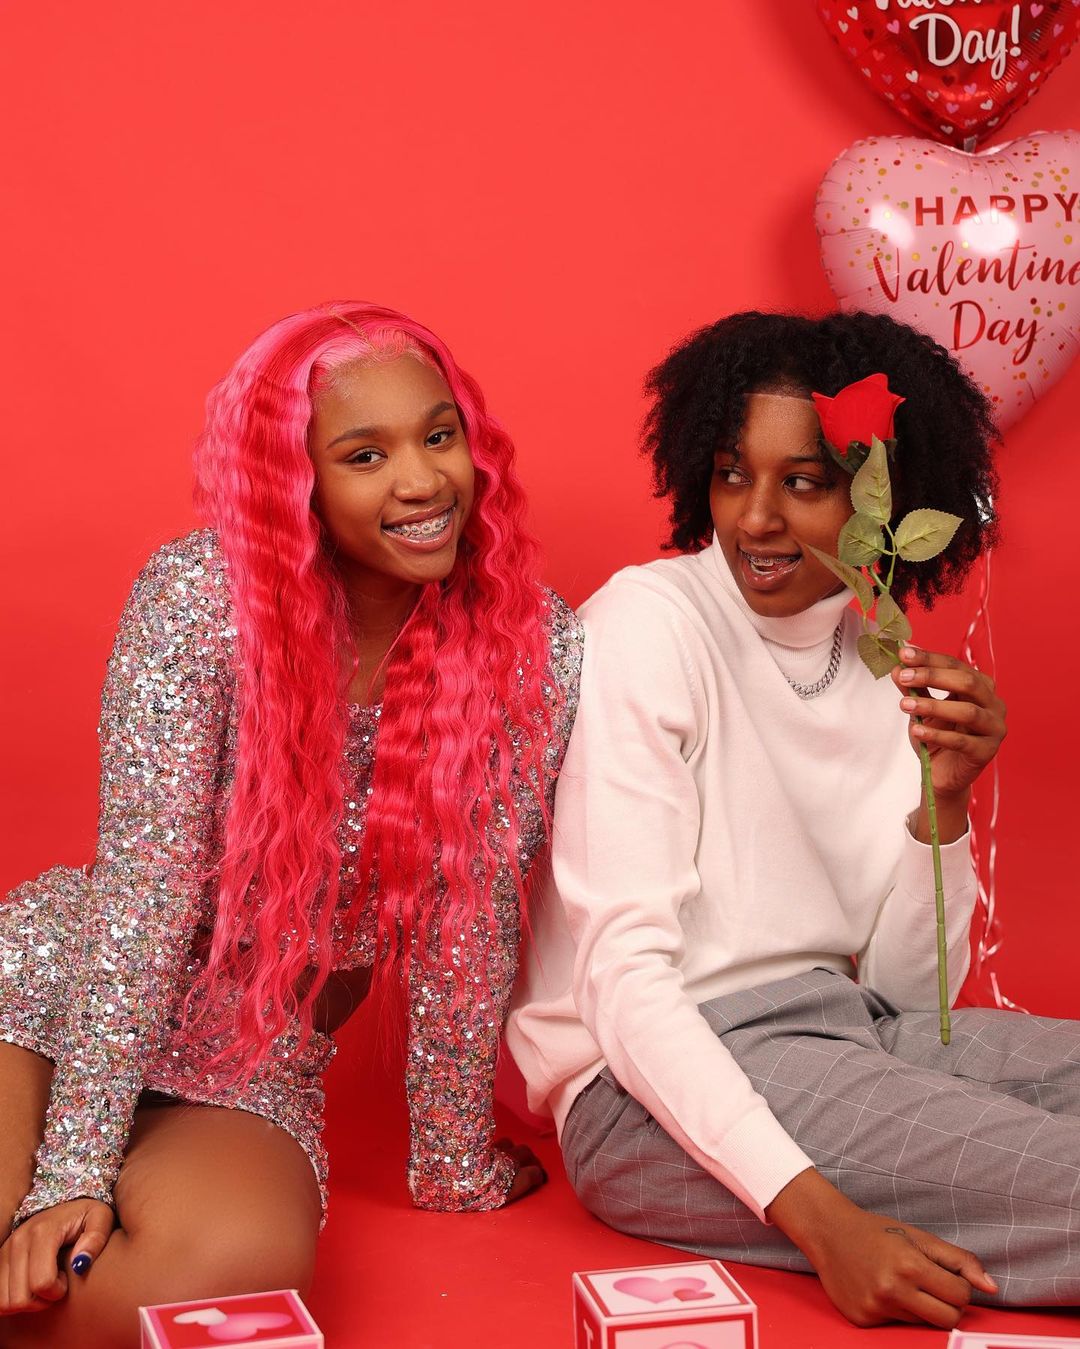 Anayah Rice with her girlfriend, Brace Face Laii, on 2021 Valentine's Day